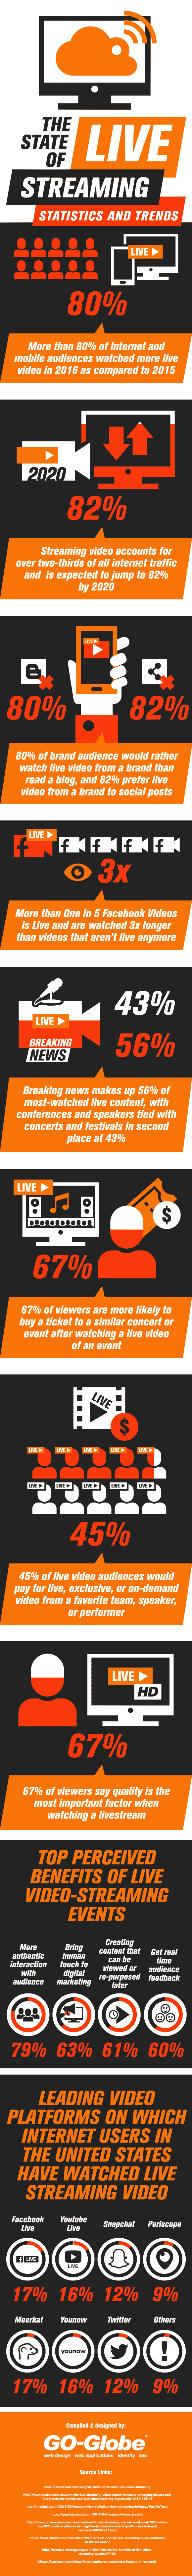 The Live Streaming Ideas Every Marketer Needs To Know [Infographic]